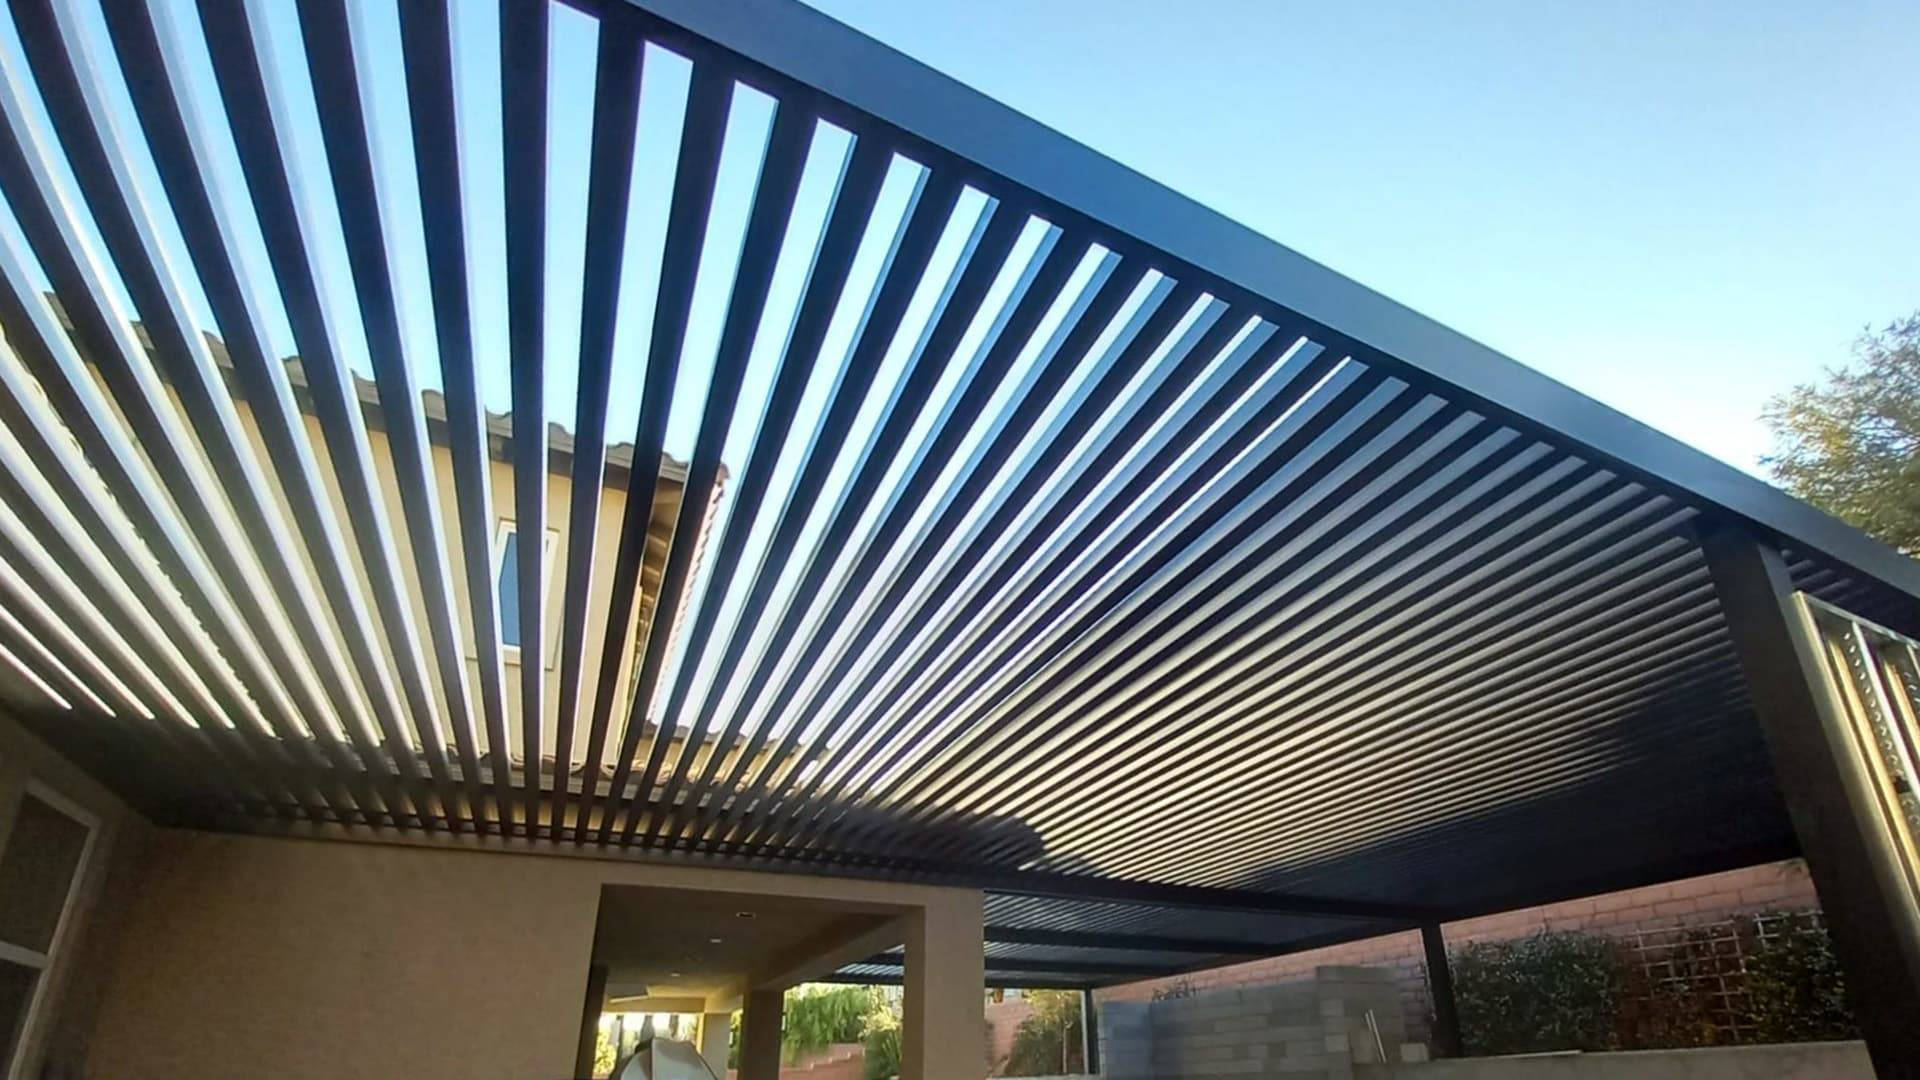 An upward looking view of an open lattice home patio cover